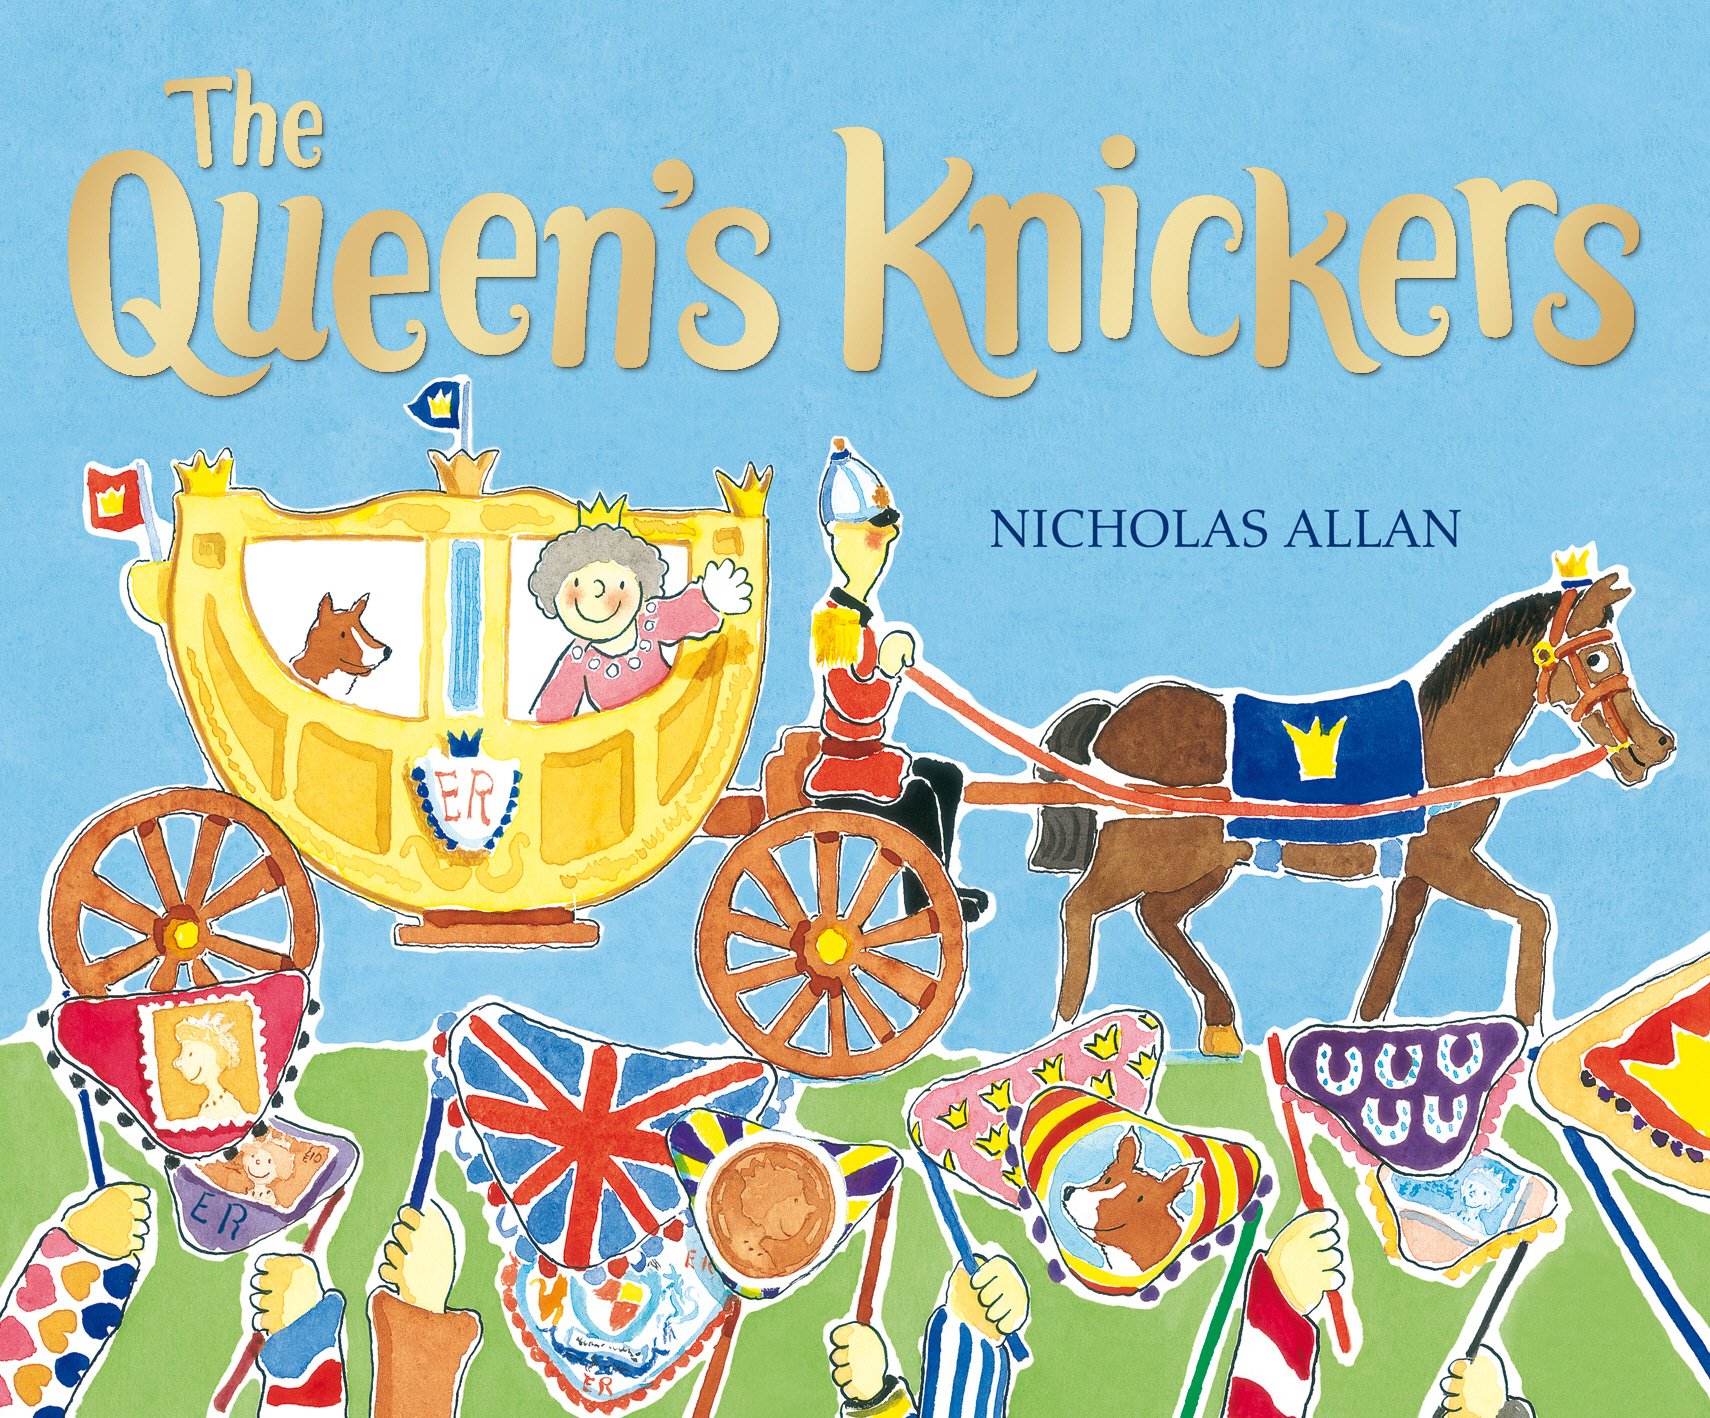 IMG : The Queen's Knickers